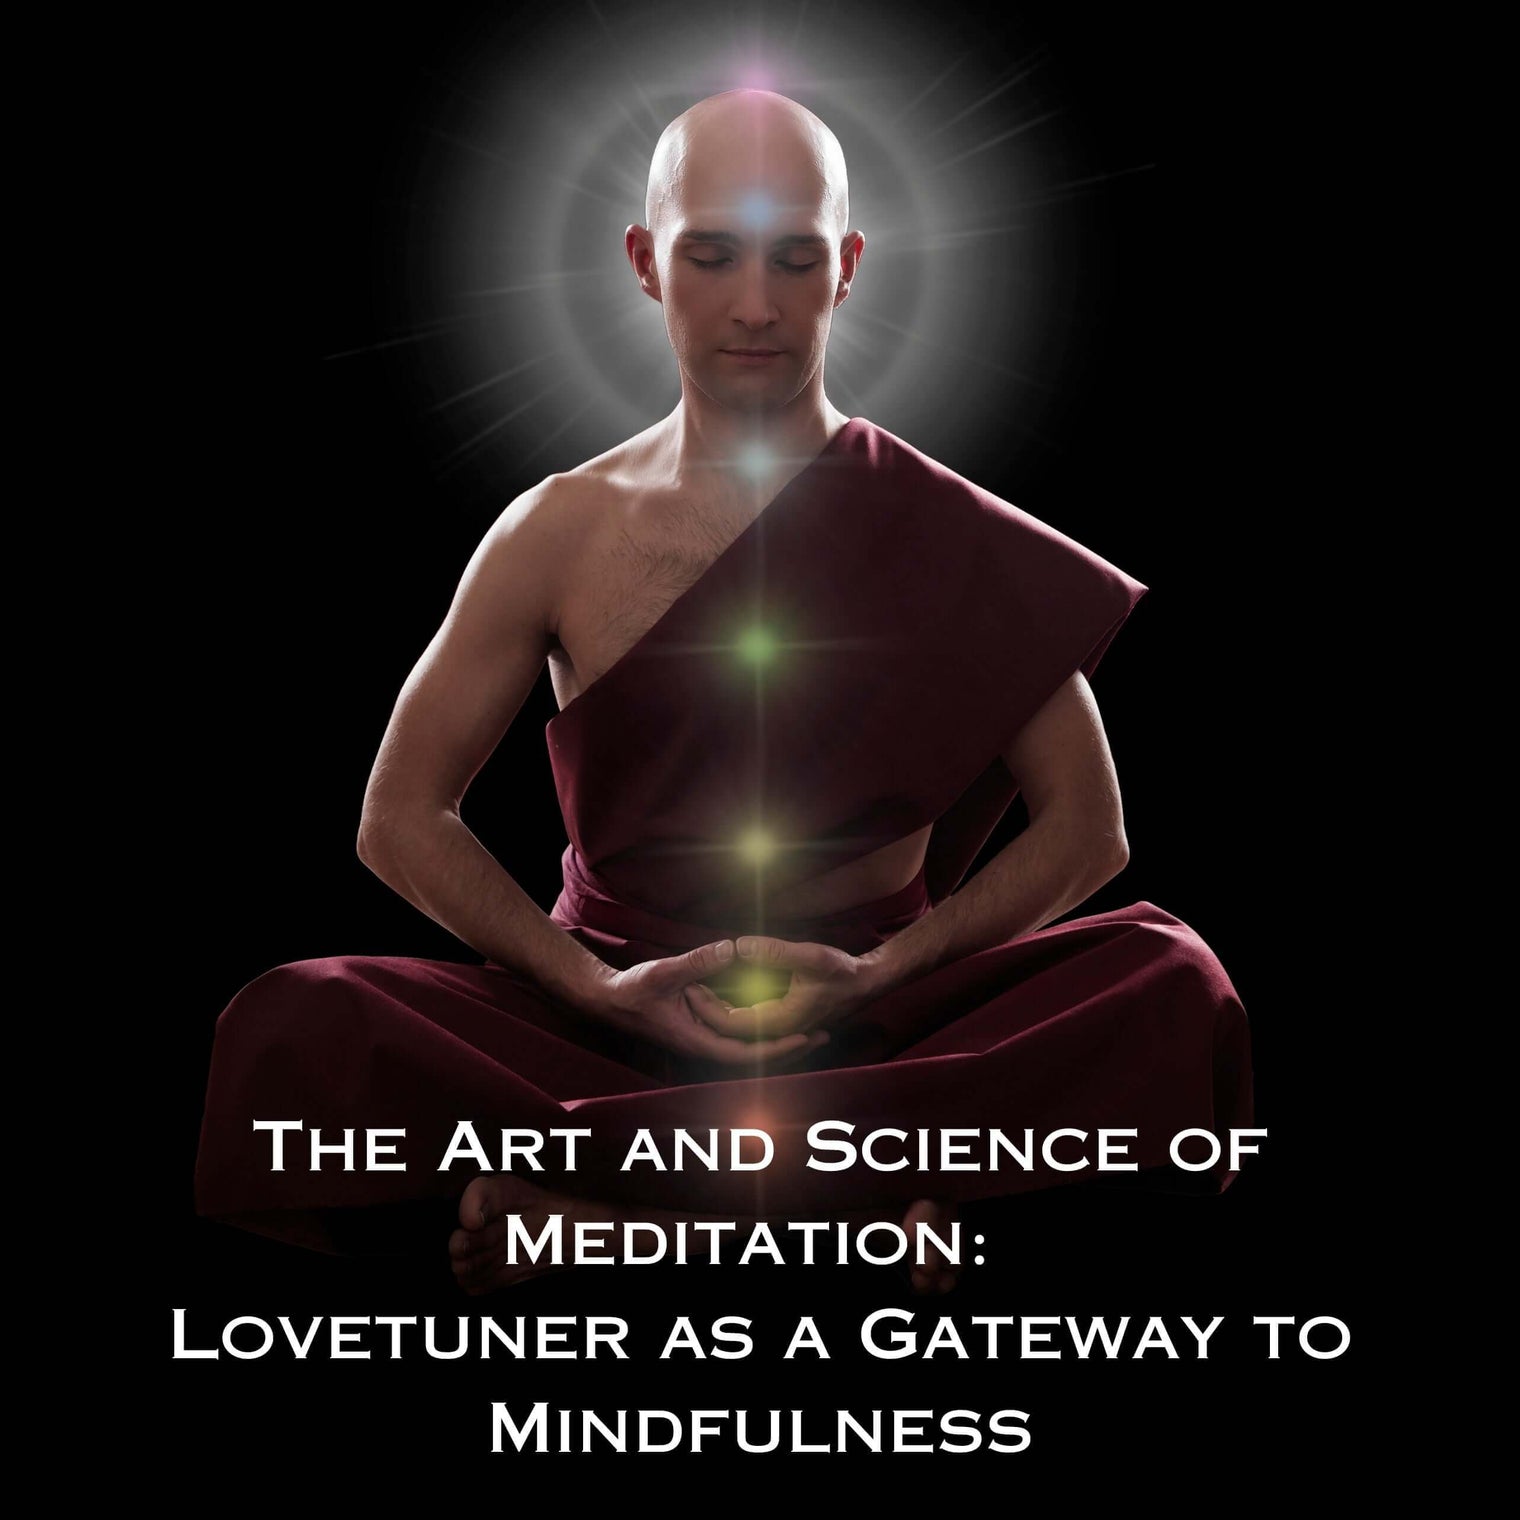 The Art and Science of Meditation: Lovetuner as a Gateway to Mindfulness